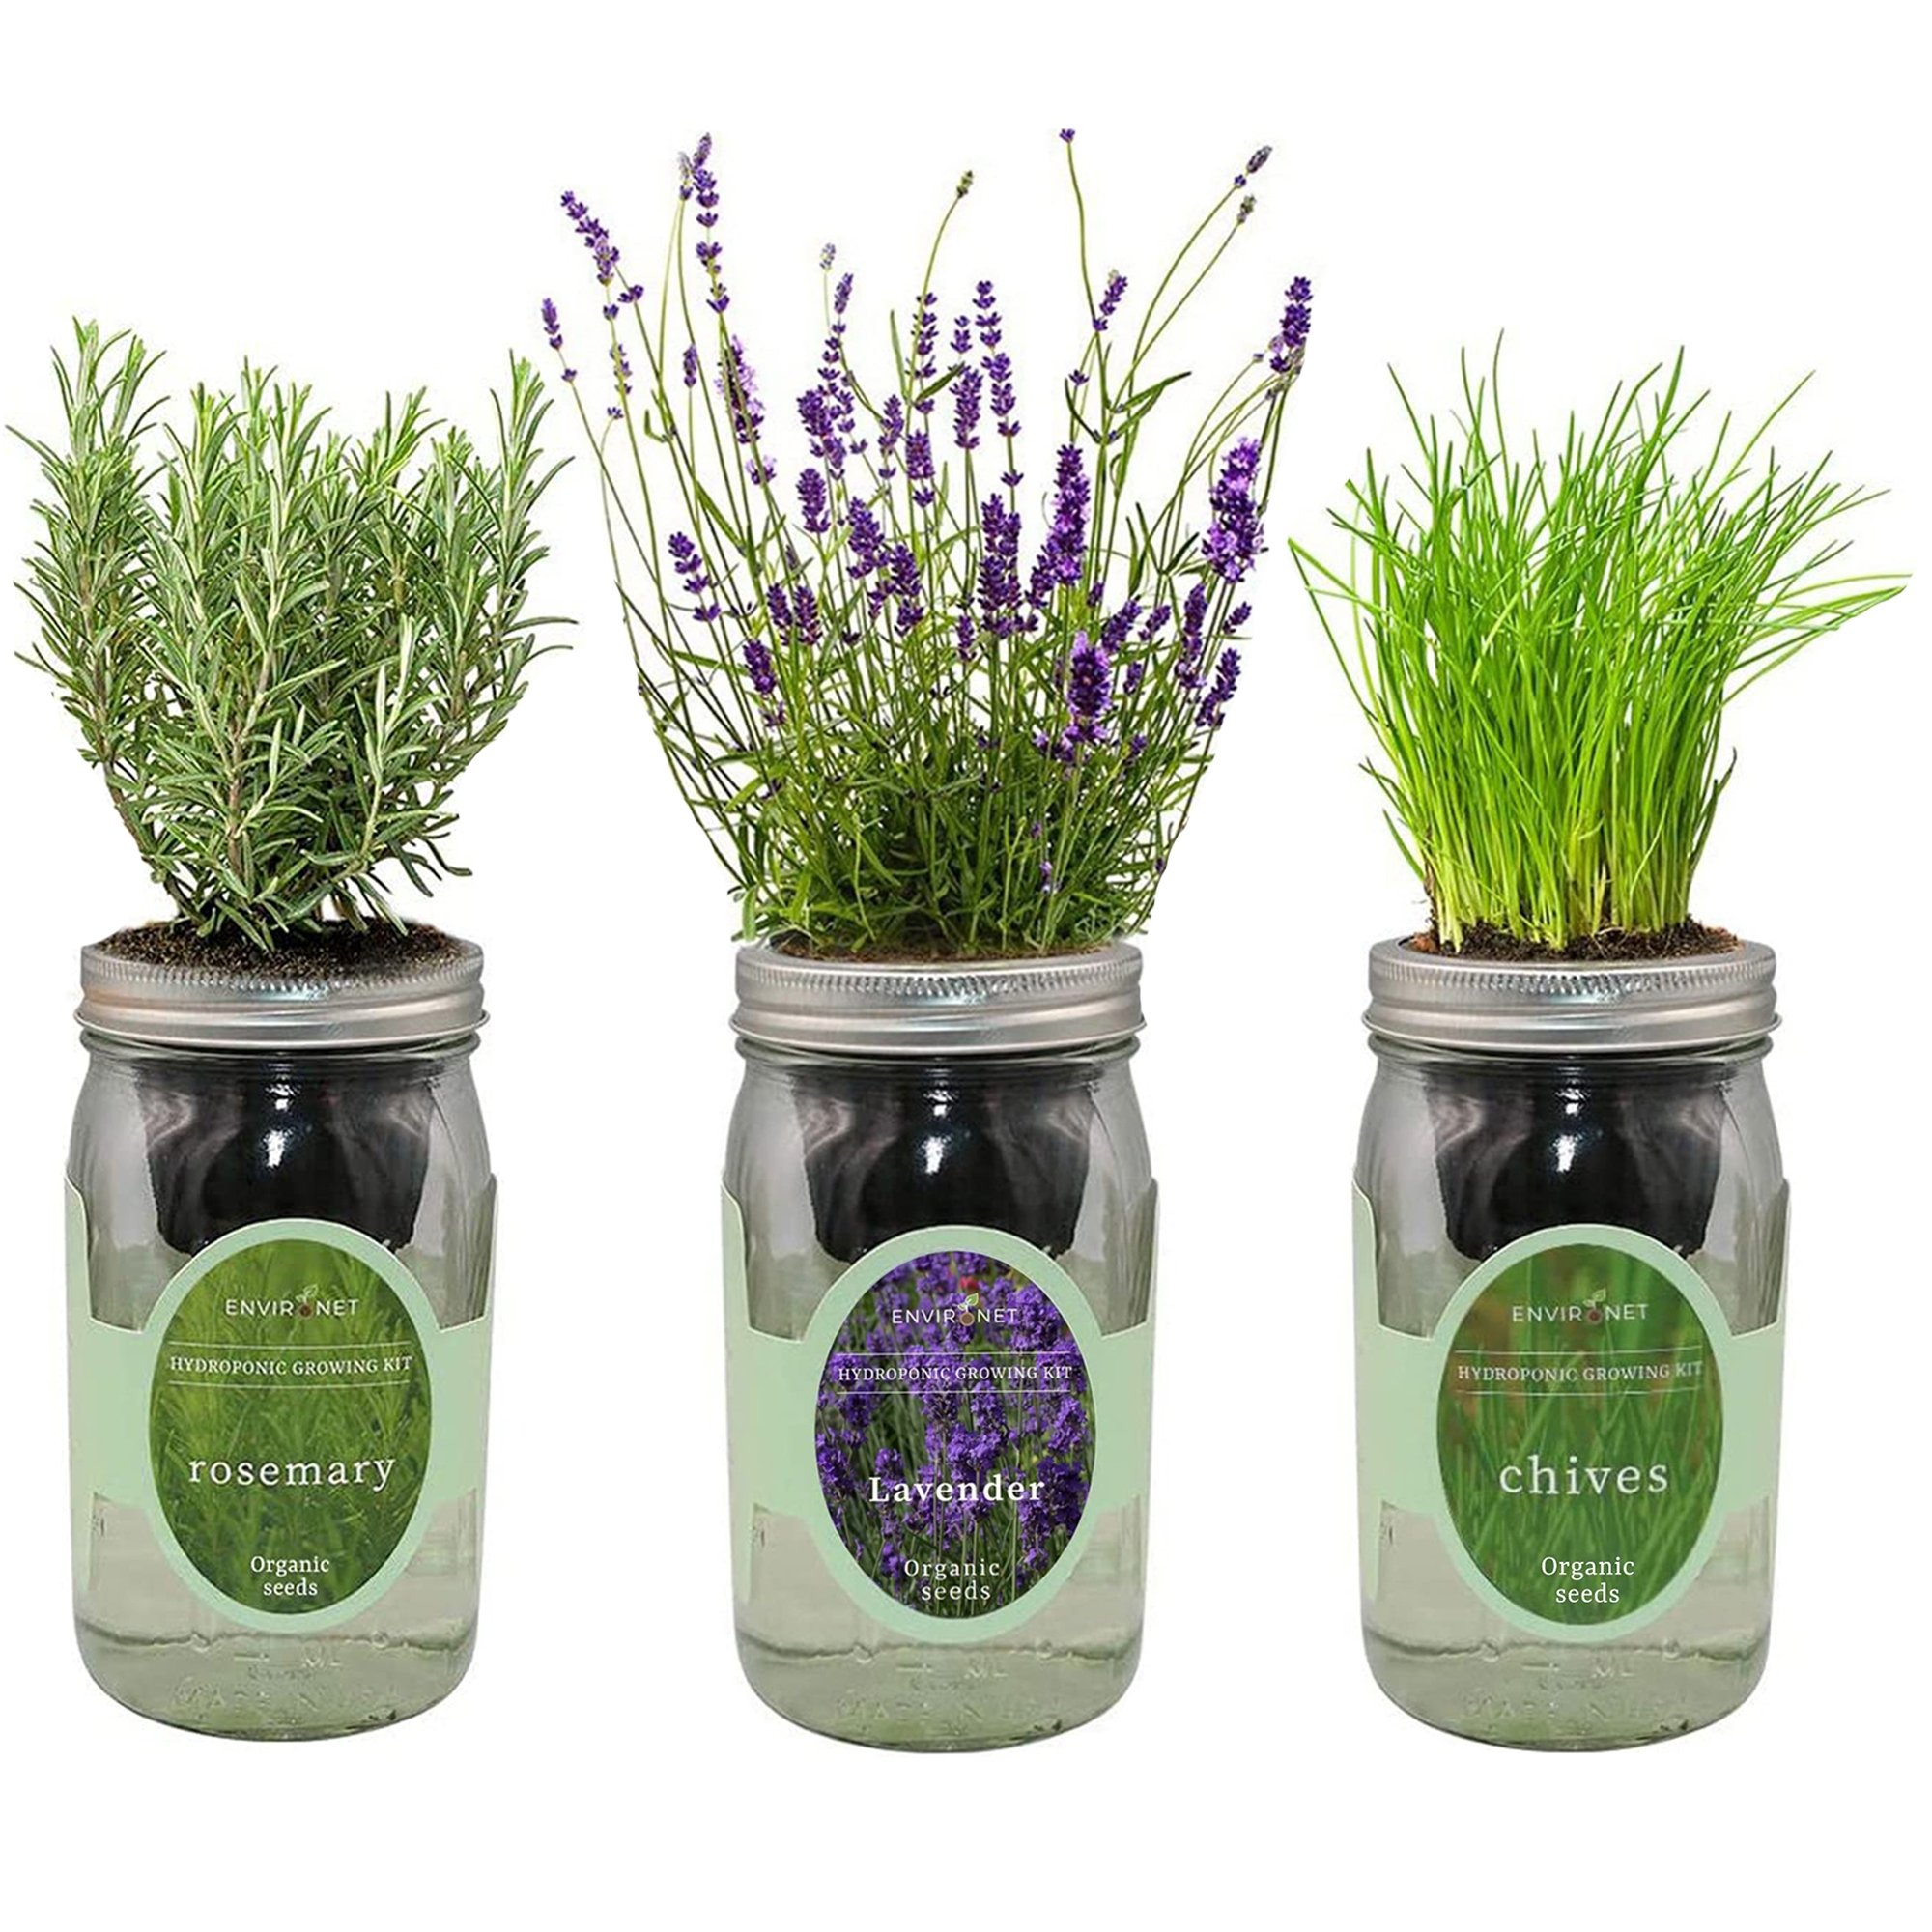 Hydroponic Herb Growing Kit Set with Organic Seeds - Lavender, Rosemary, Chives